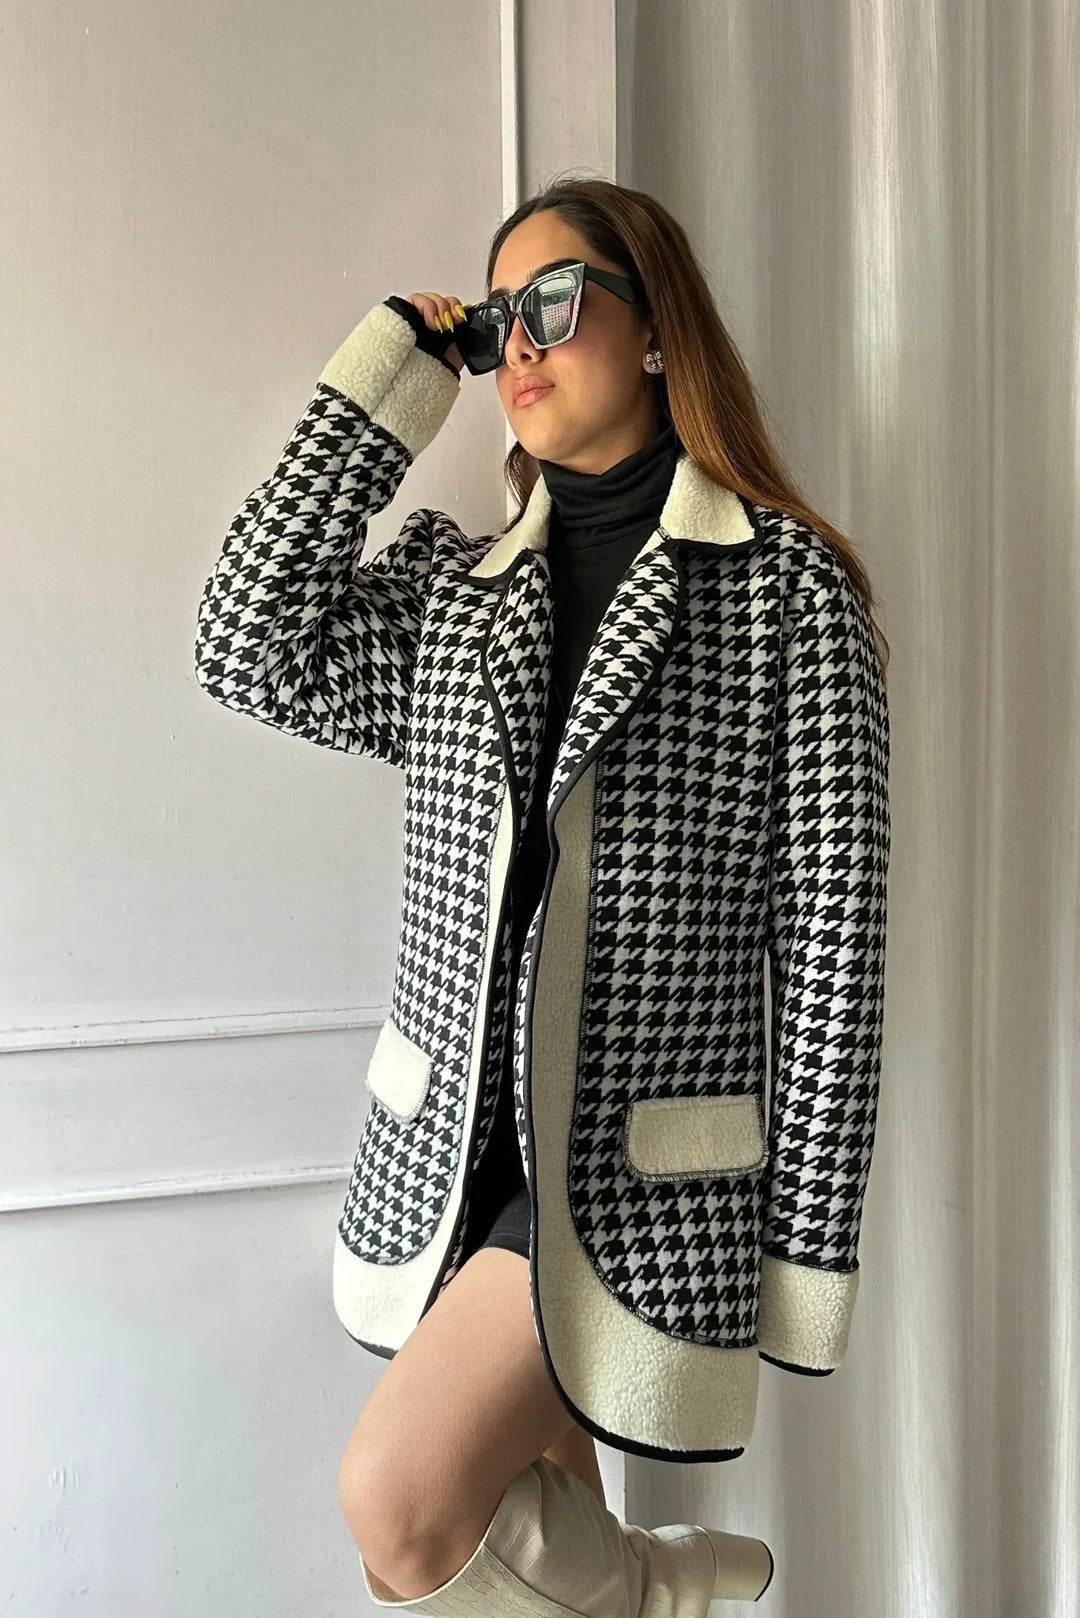 Luxurious houndstooth jacket in tweed fabric